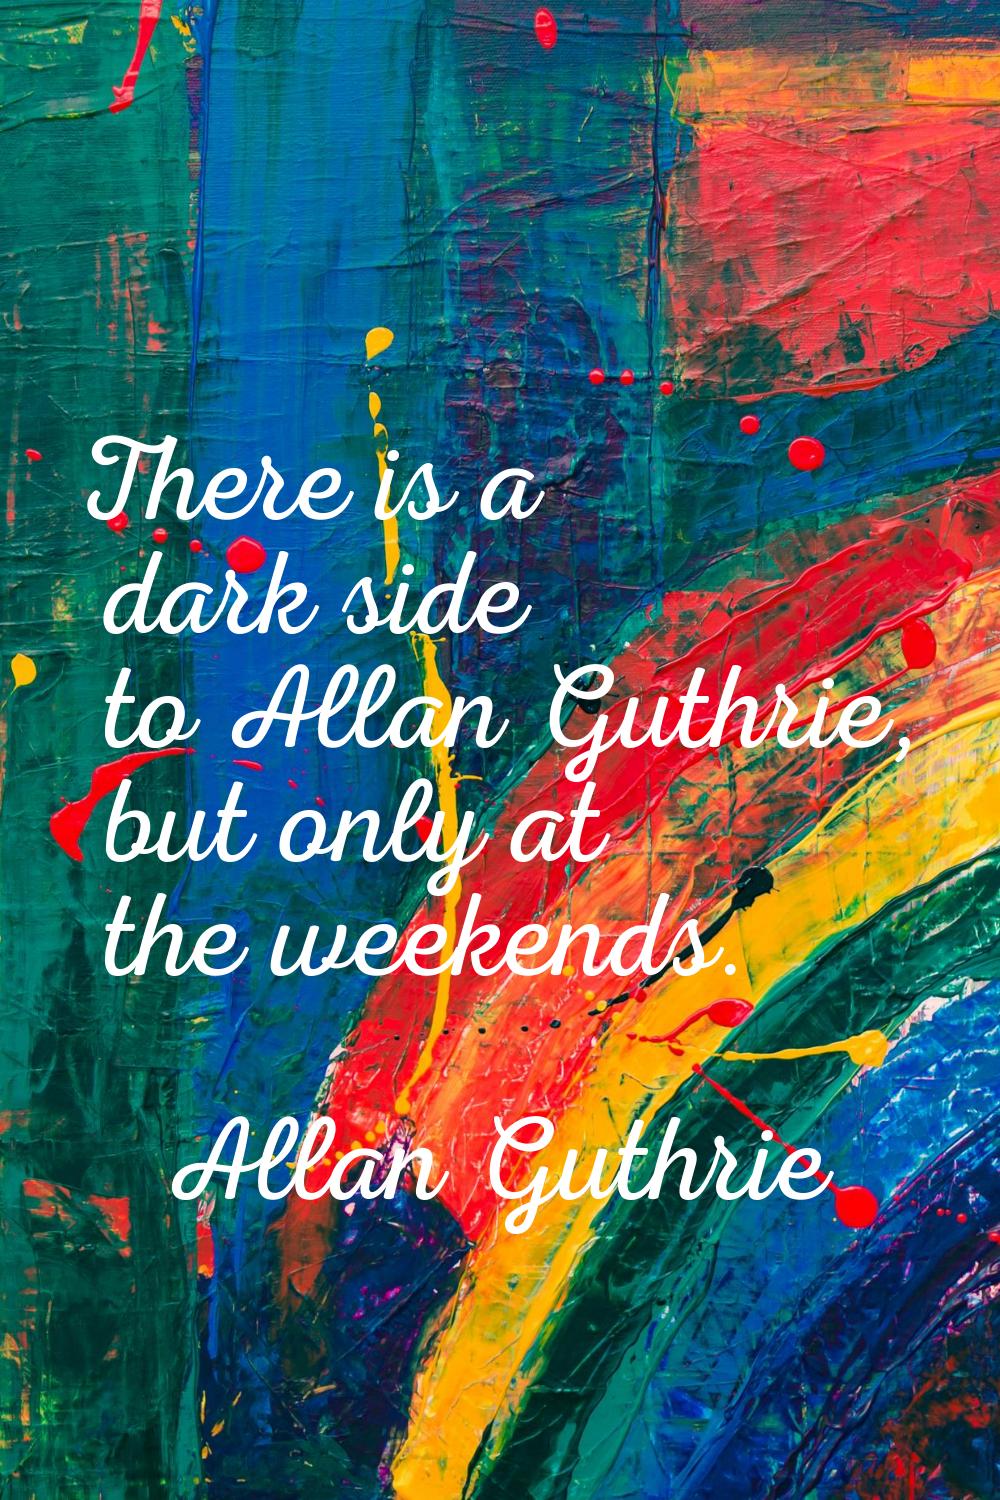 There is a dark side to Allan Guthrie, but only at the weekends.